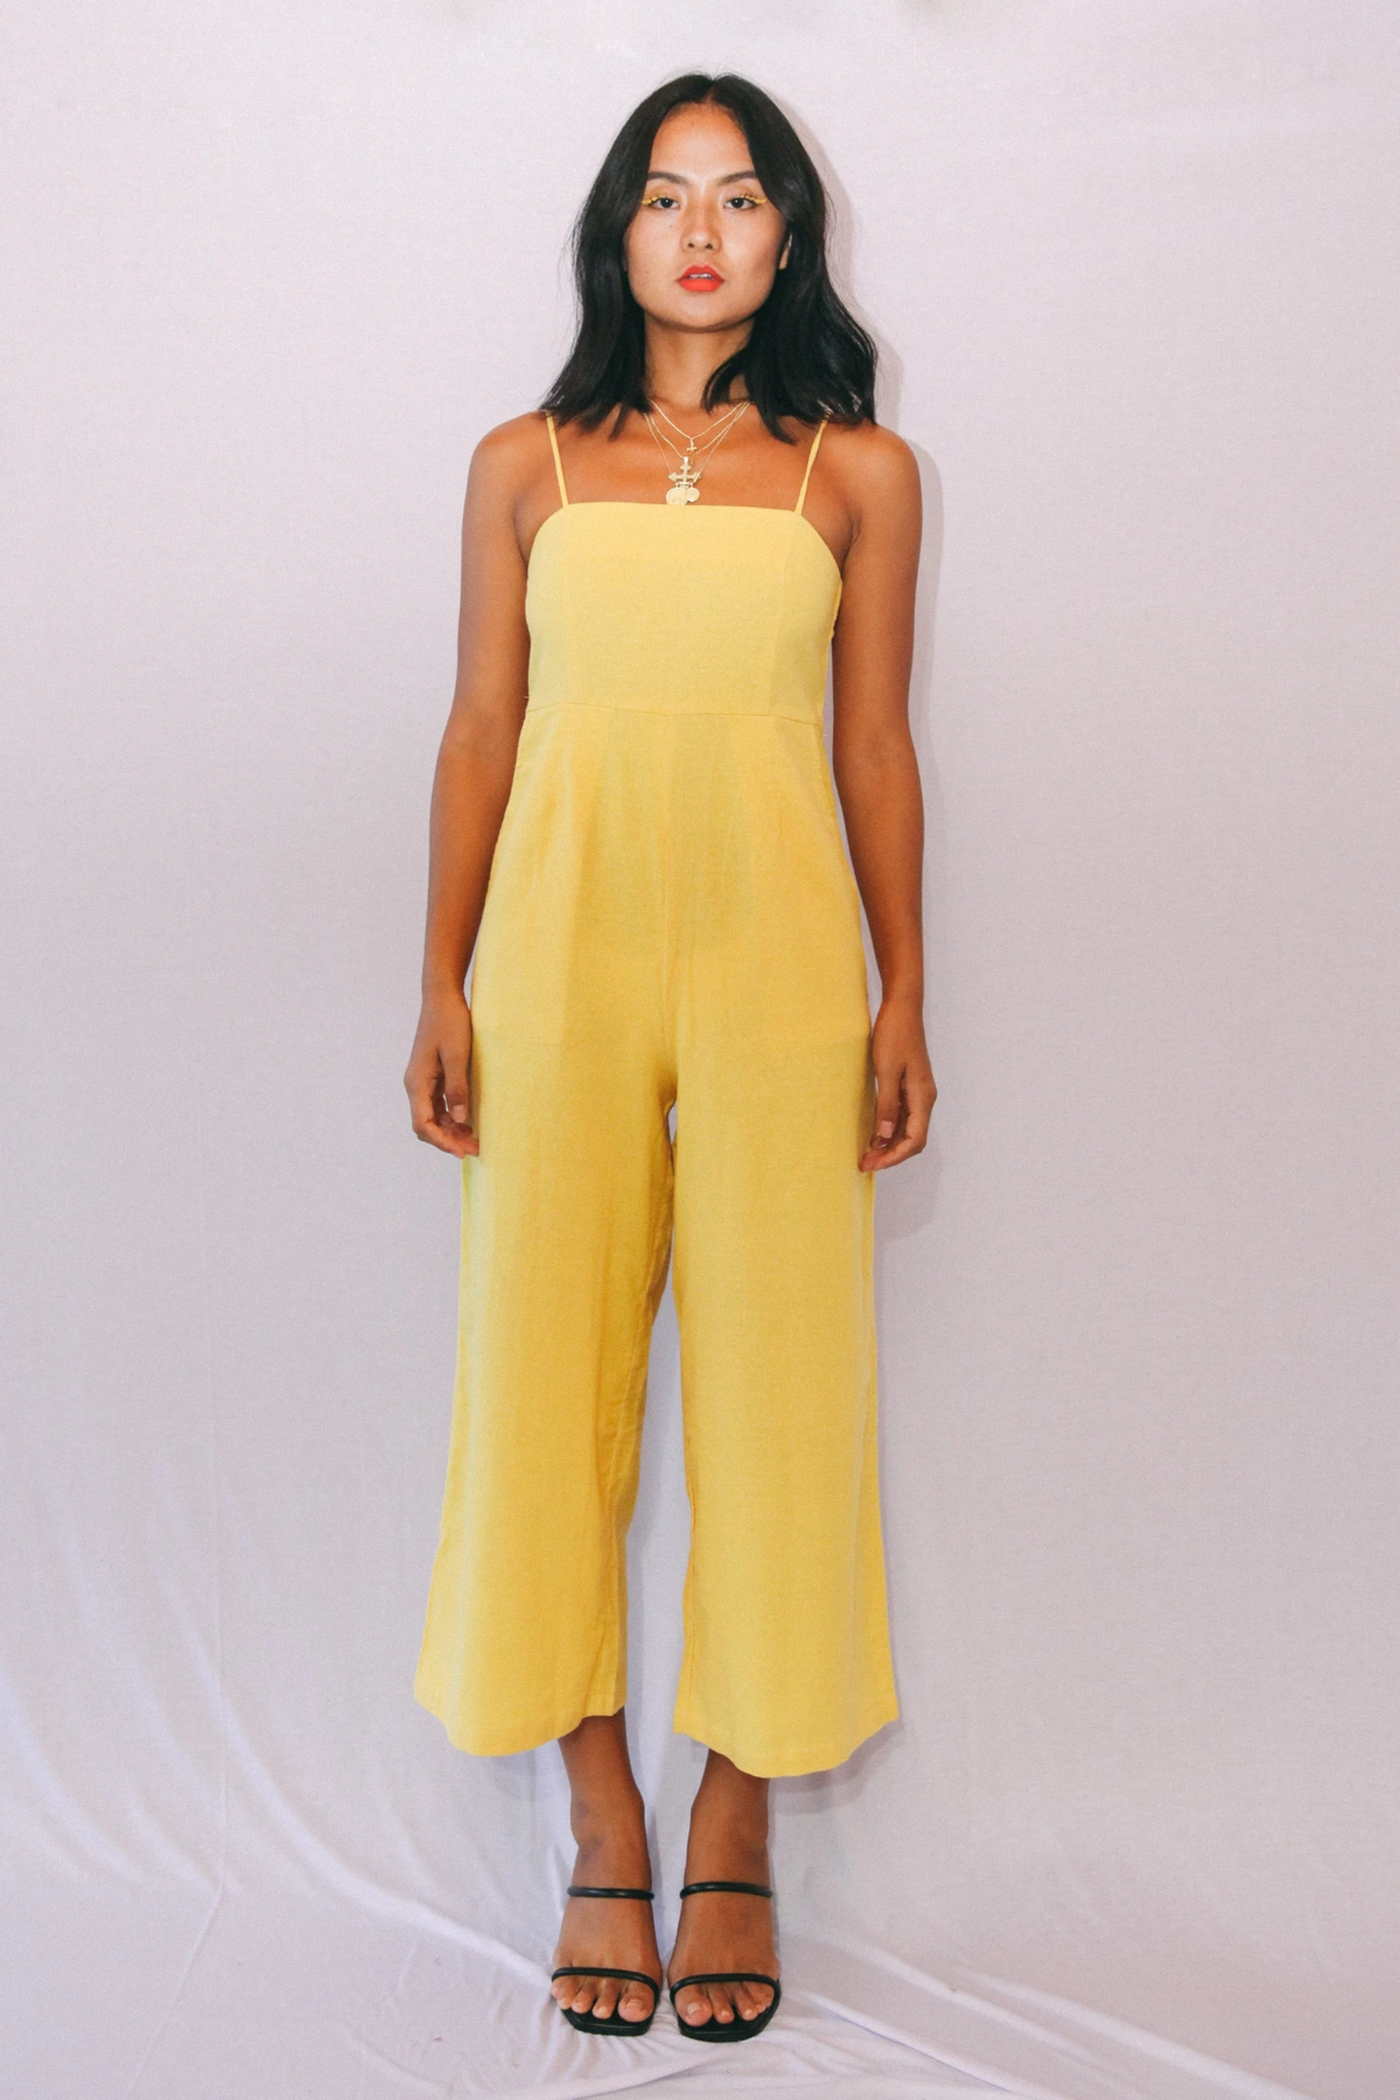 Stain Tango Jumpsuit in Banana, available on ZERRIN with free Singapore shipping